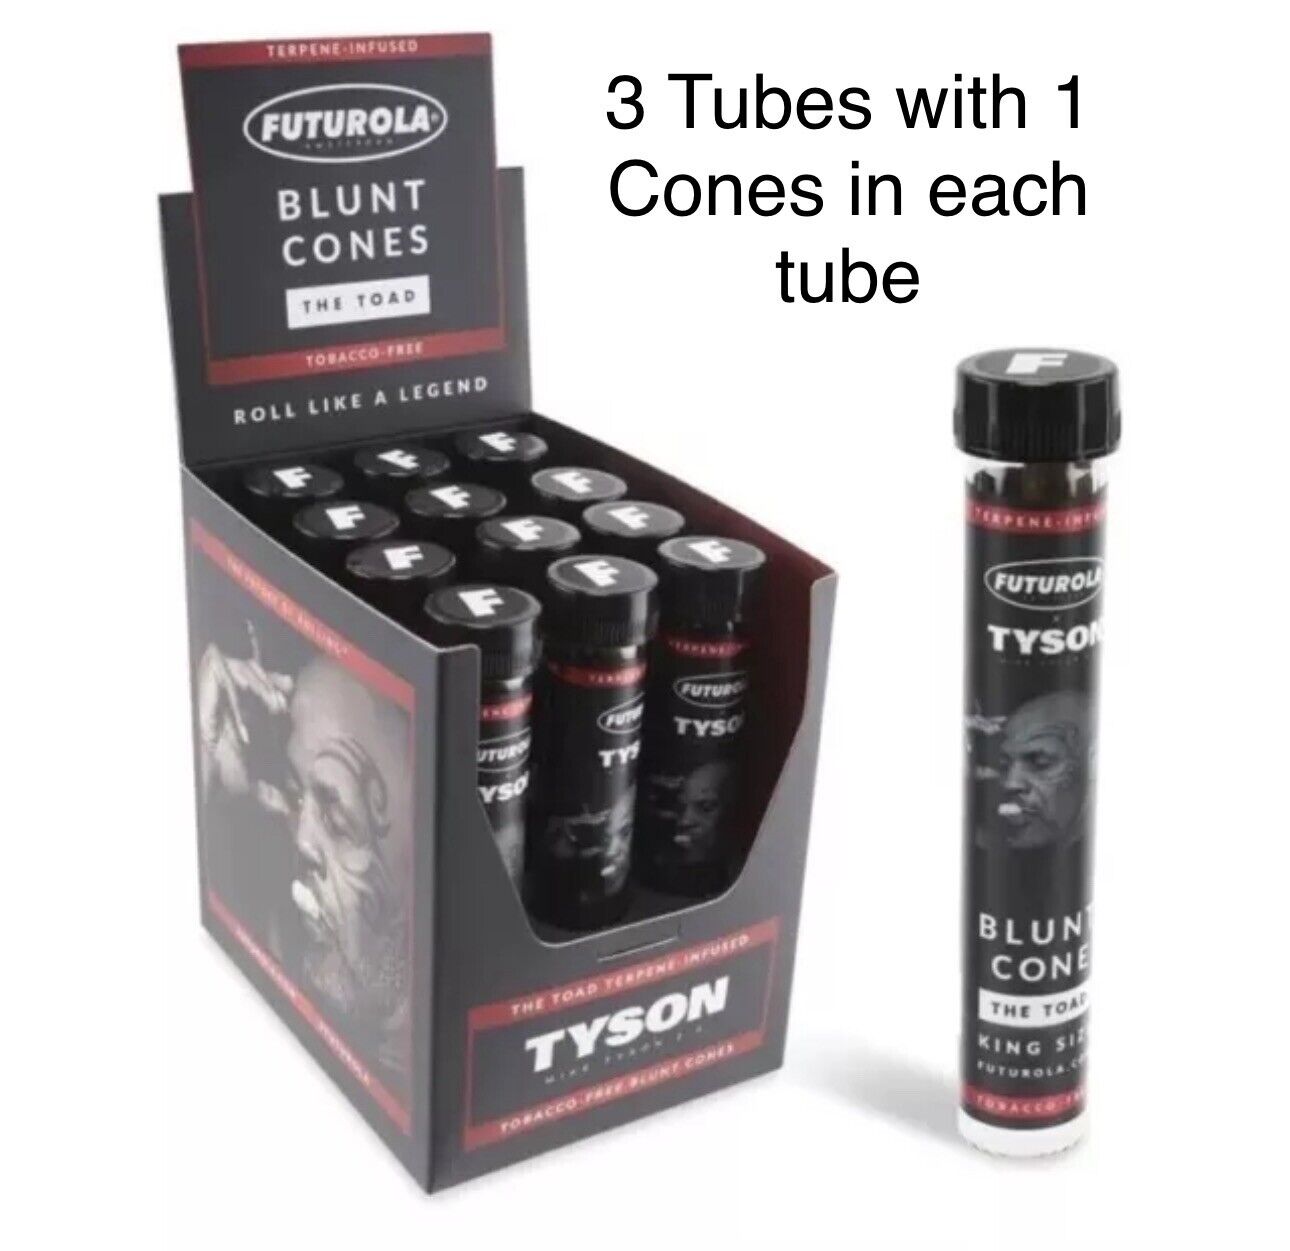 Tyson 2.0 x Futurola Rolling Cones | The Toad - 3 Tubes with 1 cone each